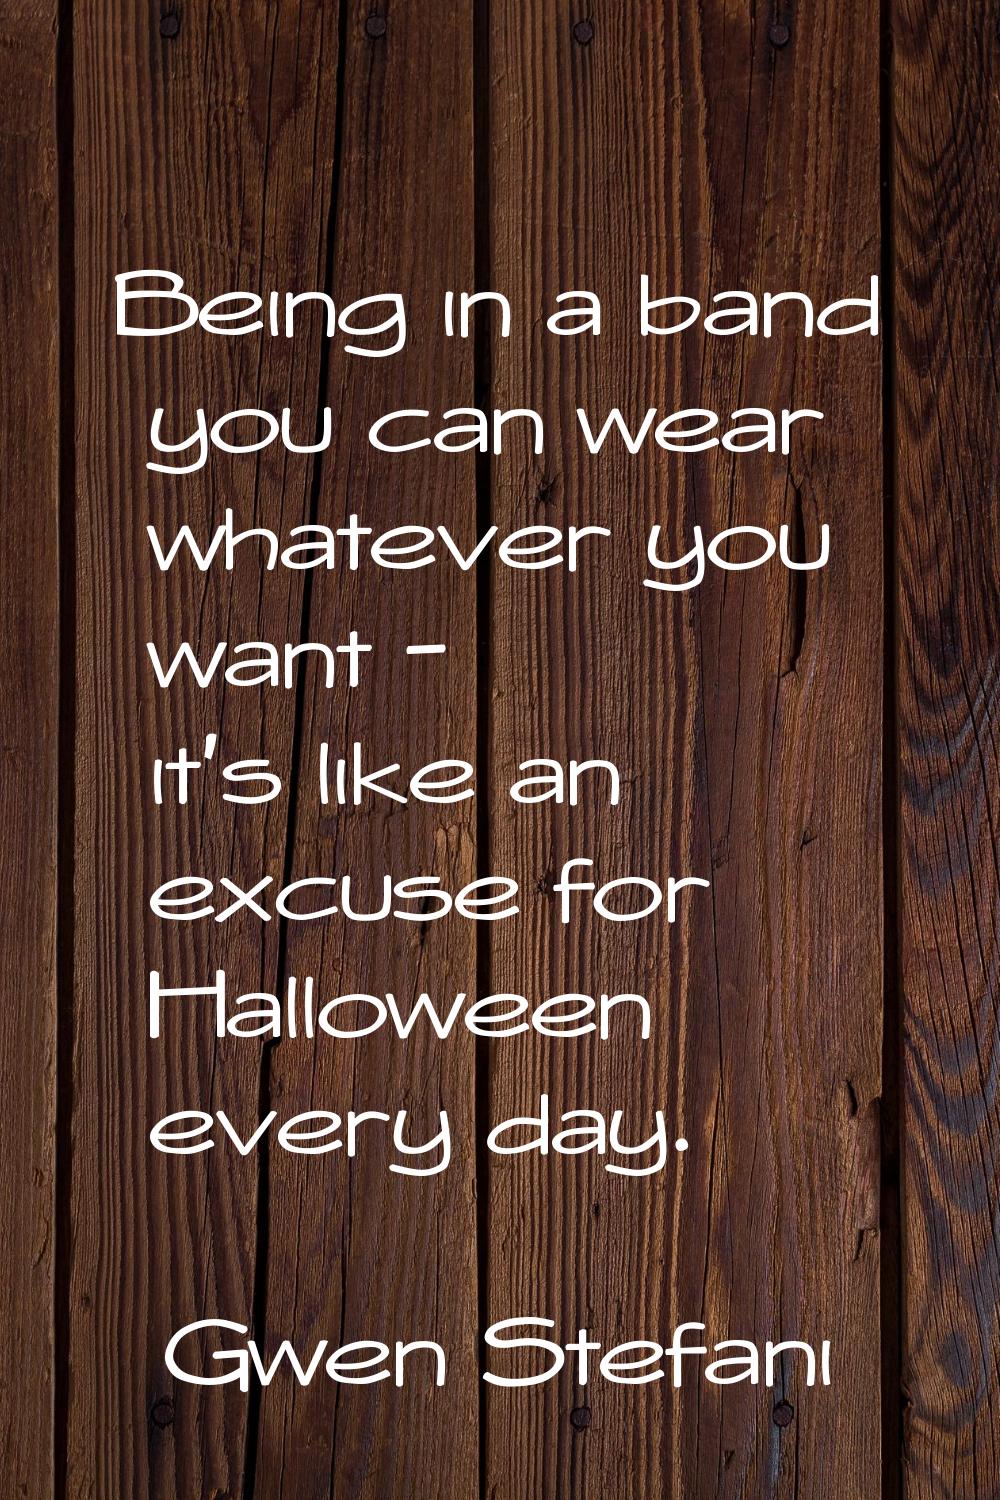 Being in a band you can wear whatever you want - it's like an excuse for Halloween every day.